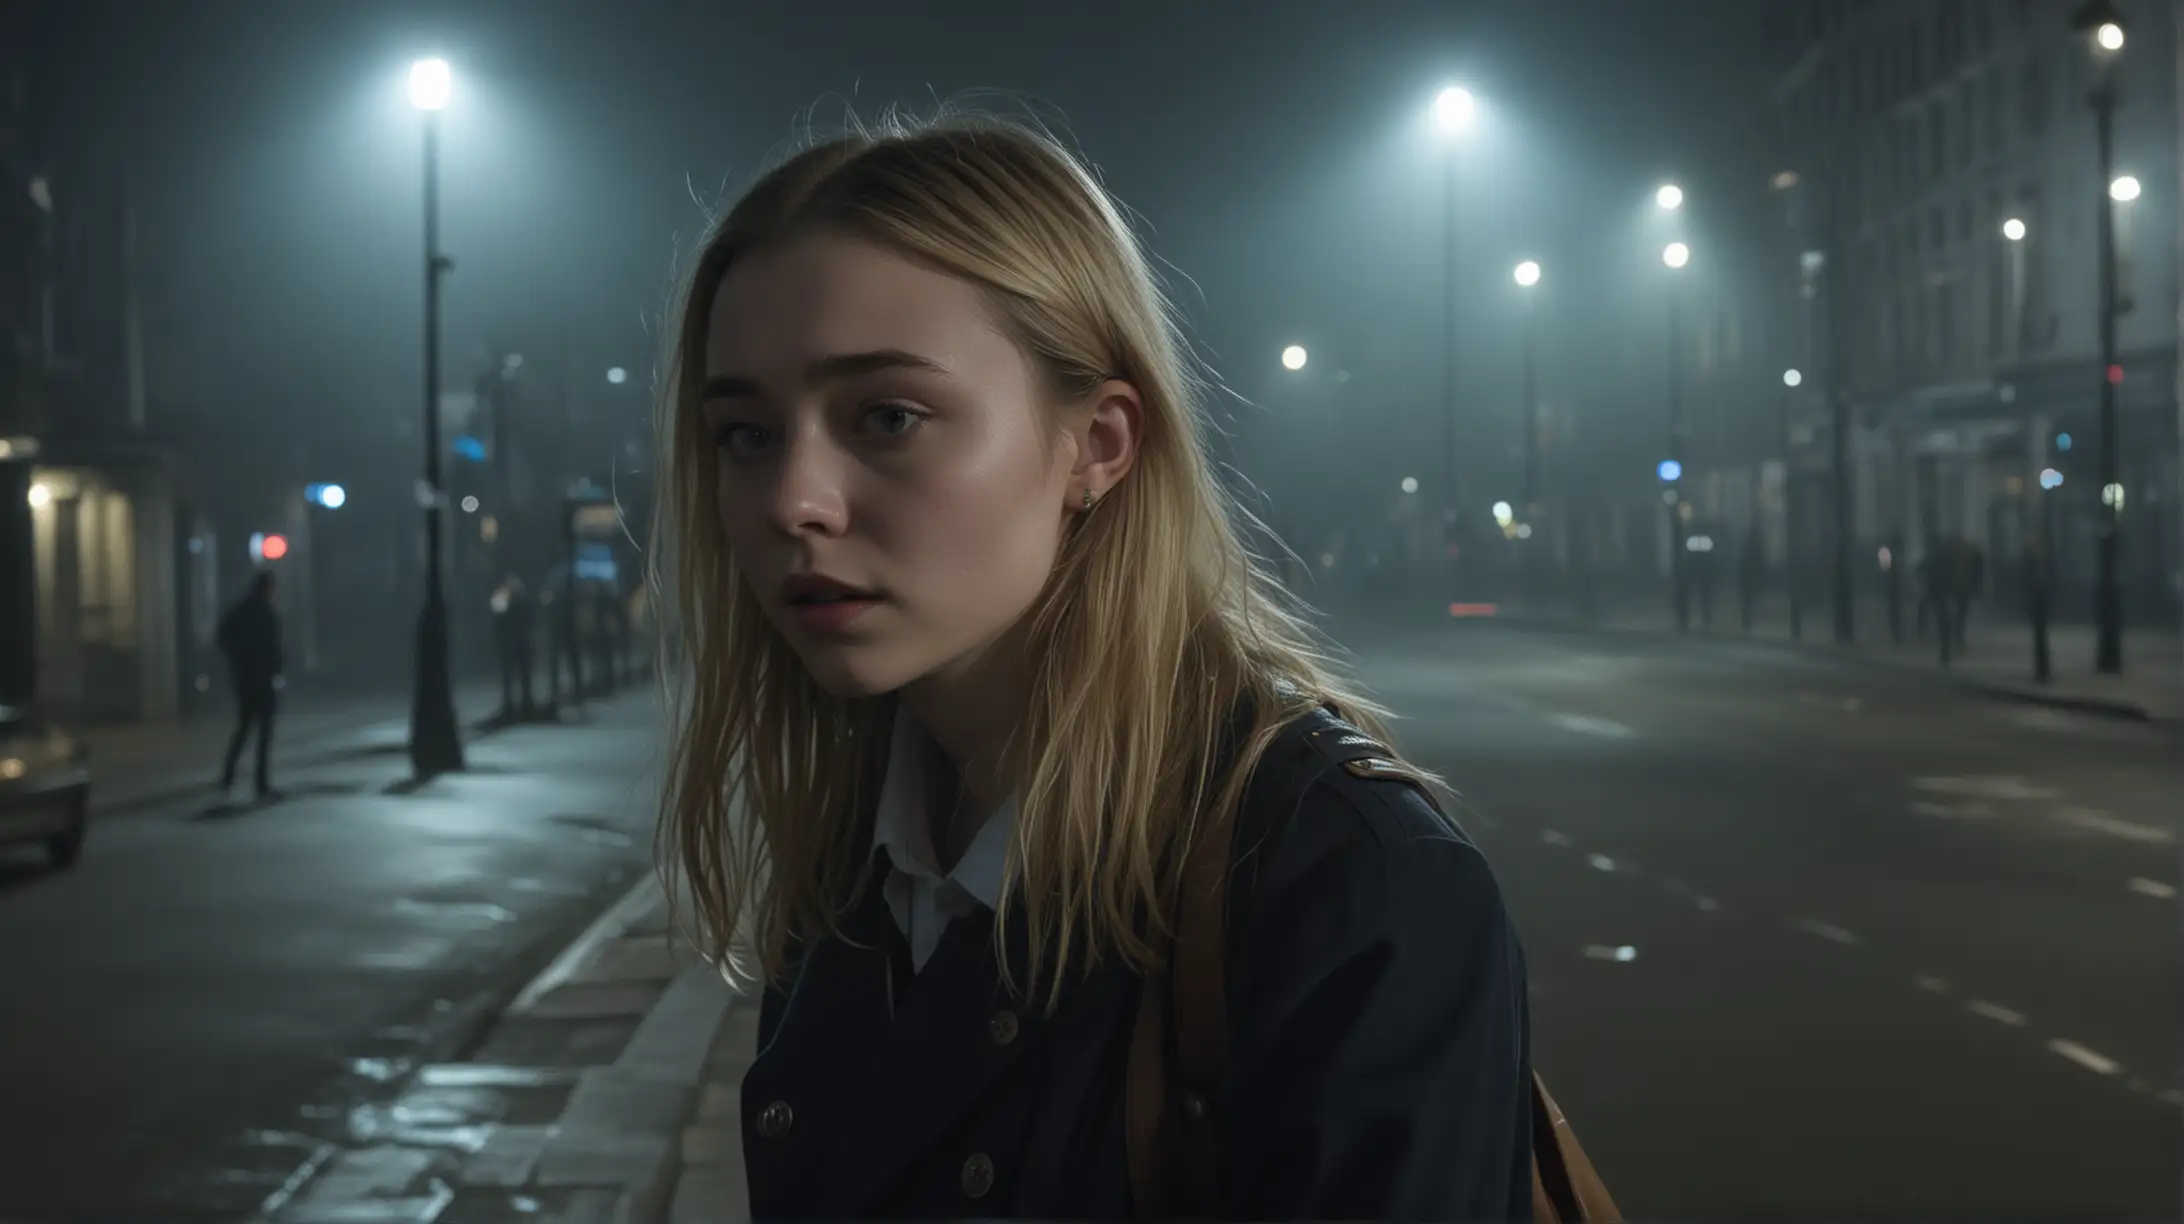 "Generate an image capturing the tension and intrigue of a deserted street corner in London on a foggy night, where a beautiful teenage girl stands, exuding an aura of sweet innocence mixed with undeniable allure, looks like Jessica Barden, she possesses long blond hair, piercing blue Talking to an older man twice her age his face obscured from view, atmosphere of mystery and potential danger of their encounter."
